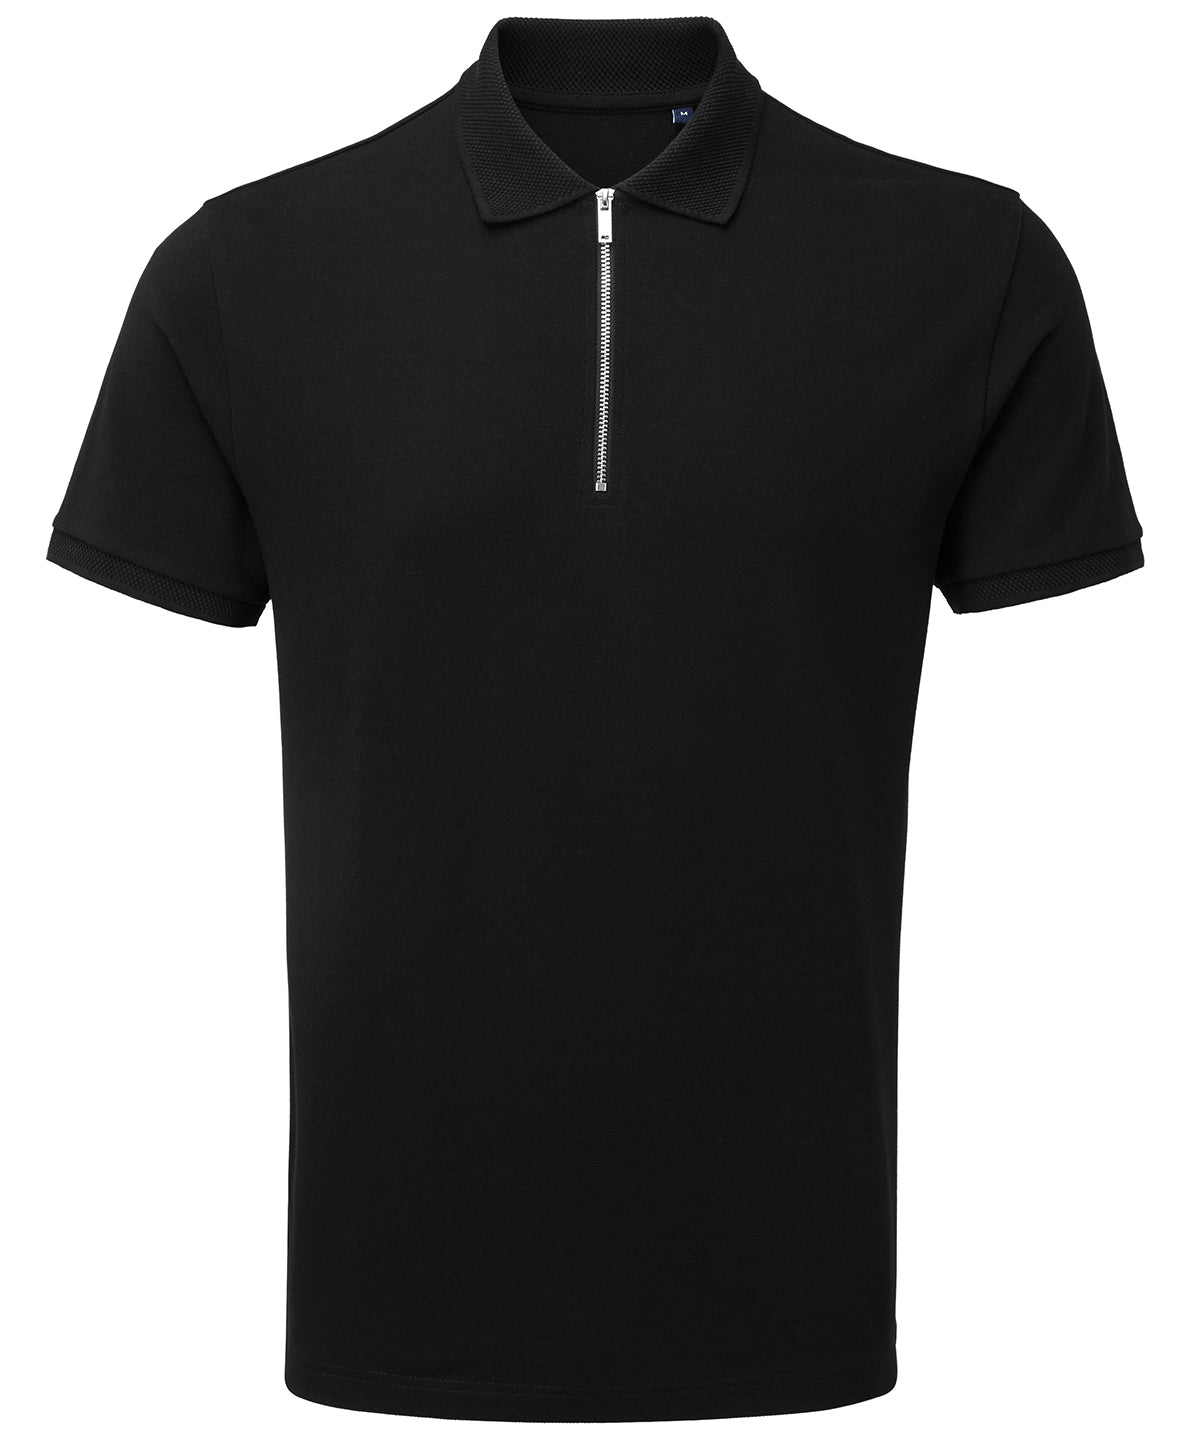 Personalised Polo Shirts - Black Asquith & Fox Men's zip polo